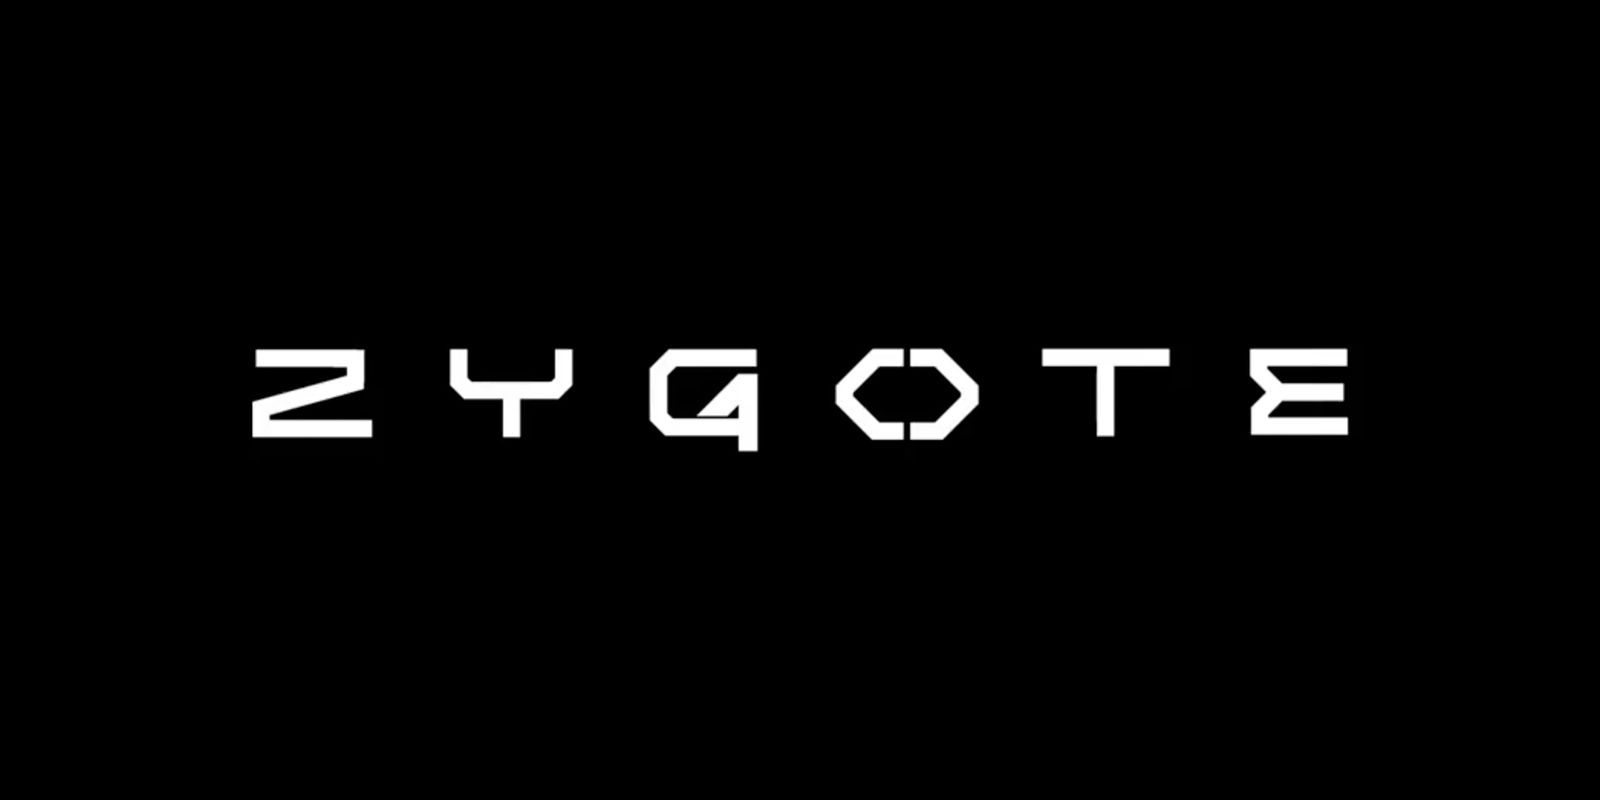 What Neill Blomkamp’s Short Film Zygote Says About His Canceled Alien 5